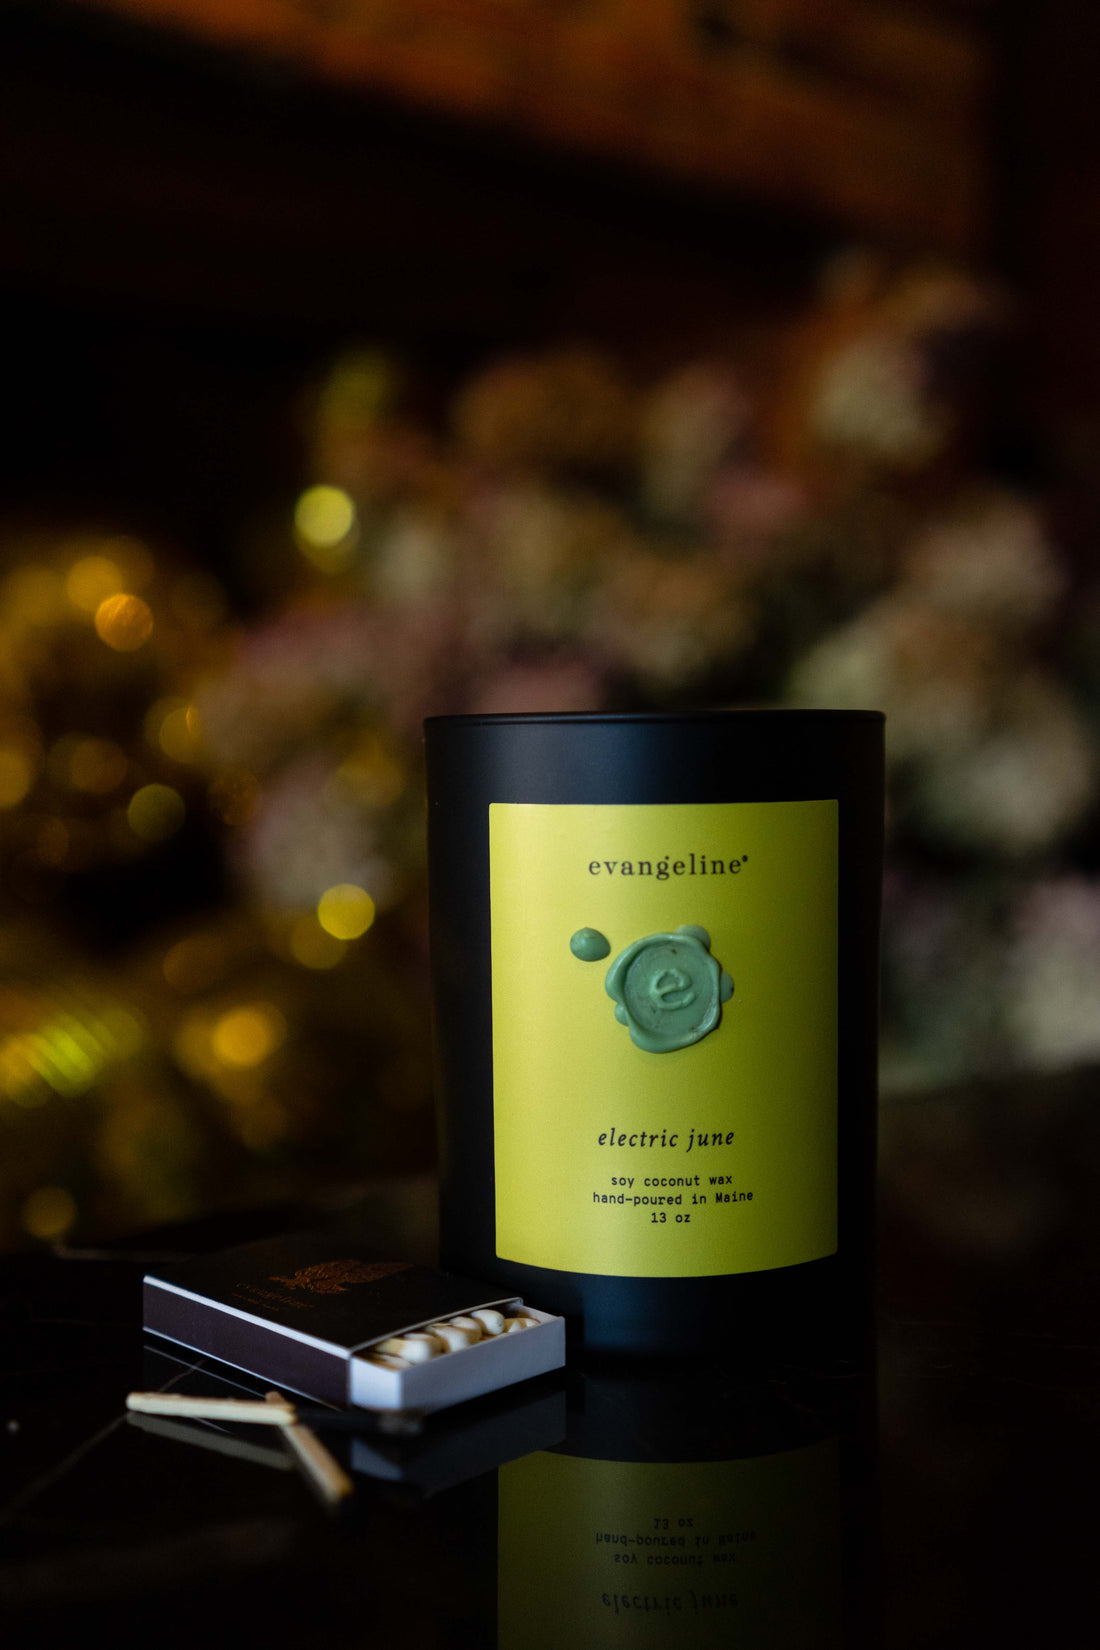 Soy coconut wax scented candle with cedar wood wick. Hand-poured in Portland Maine. Black matte glass jar, chartreuse label, mint green wax seal.